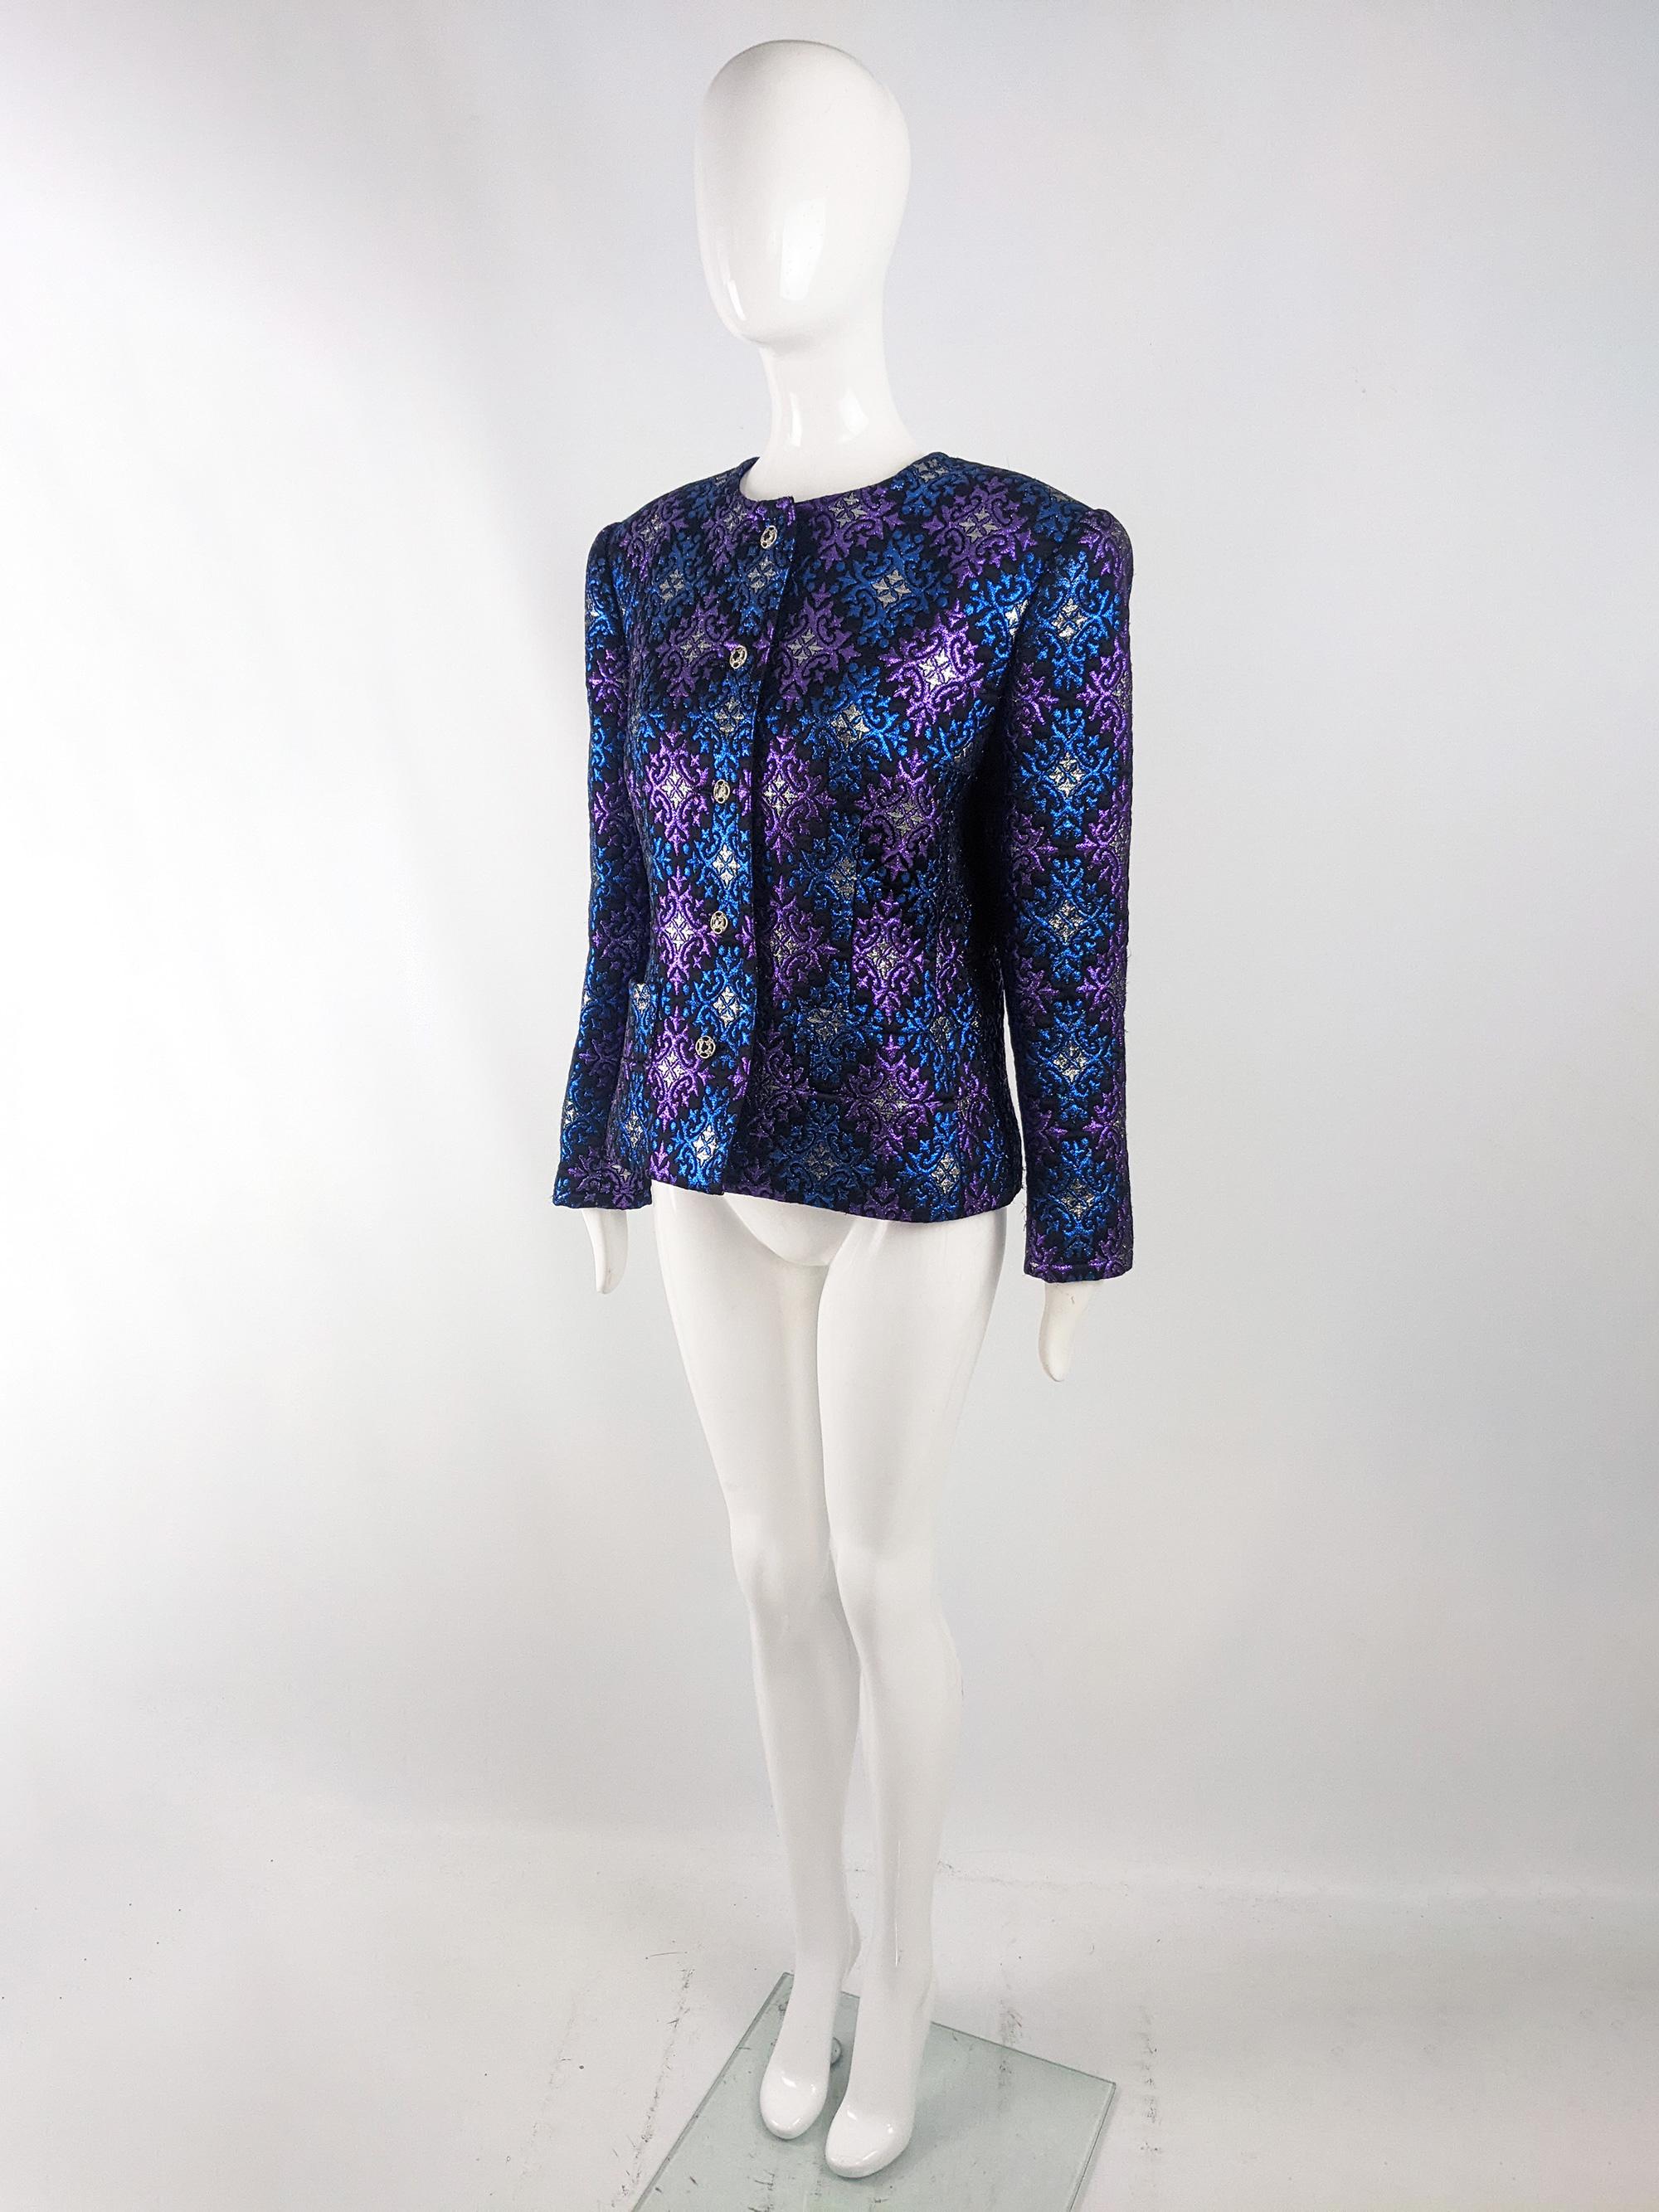 Givenchy Vintage 1980s Black Blue & Purple Brocade Jacket Evening Lamé Coat In Fair Condition In Doncaster, South Yorkshire